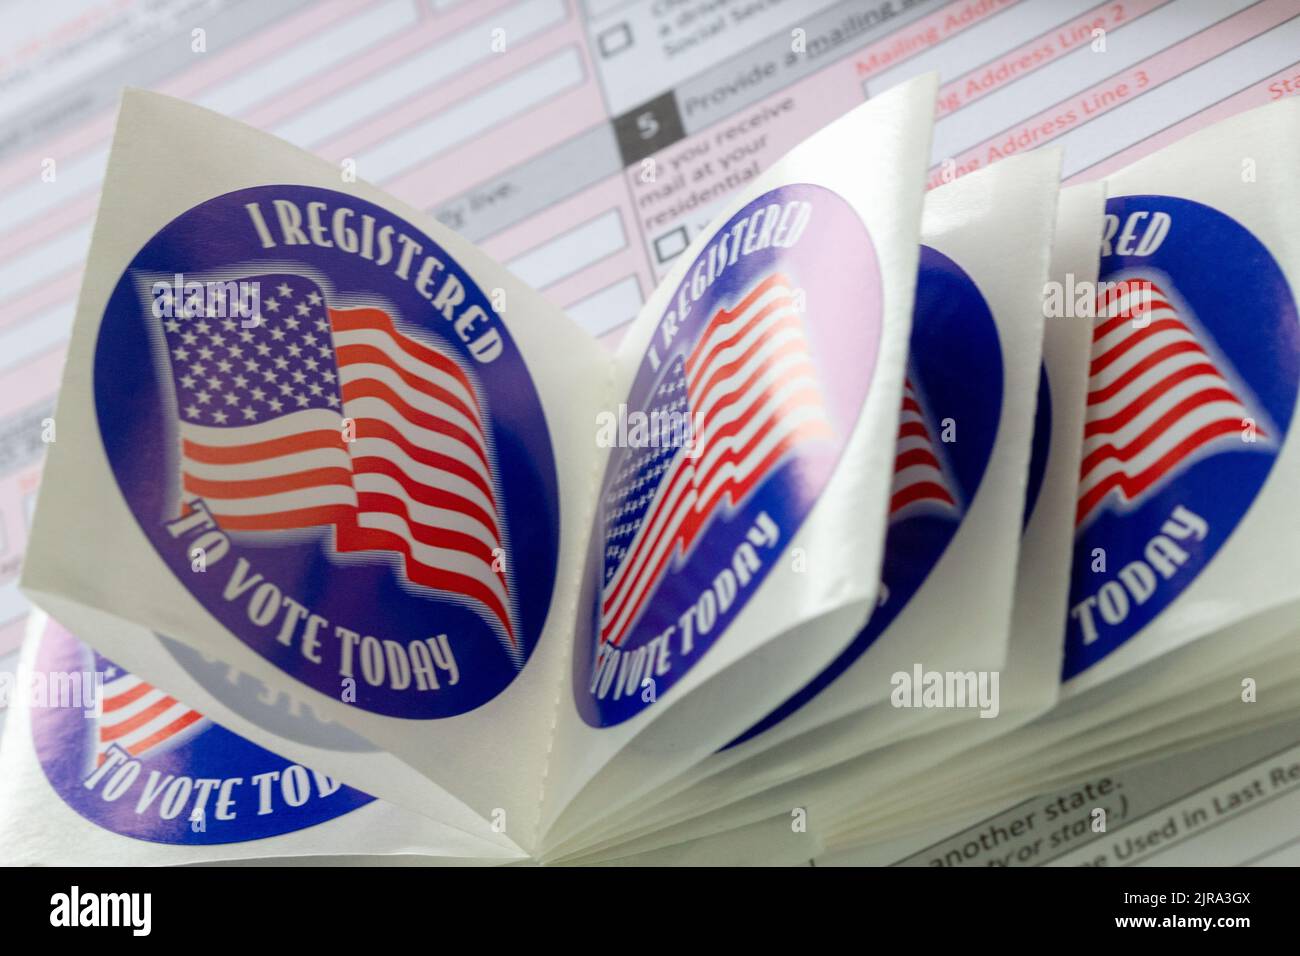 Stickers say 'I registered to vote today' for the 2022 mid-term election in the USA Stock Photo